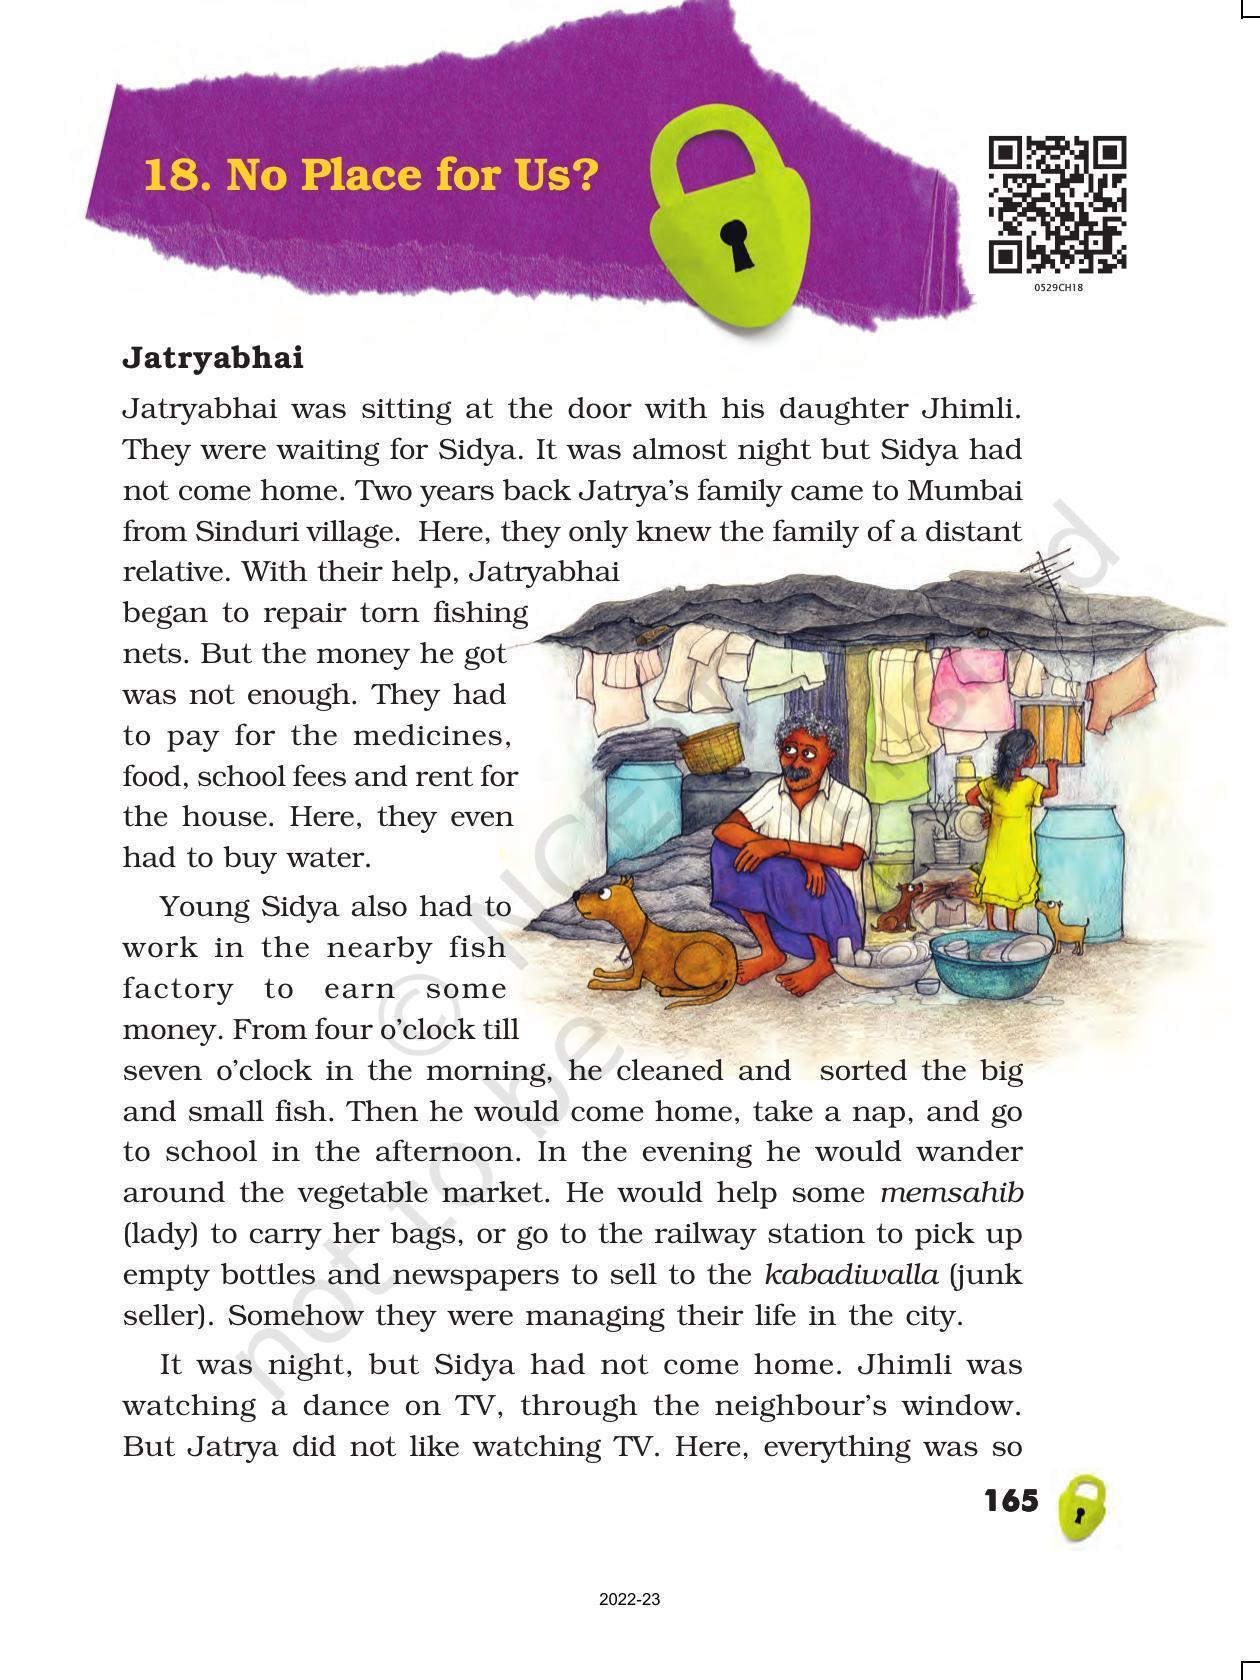 NCERT Book for Class 5 EVS Chapter 18 No Place for Us? - Page 1